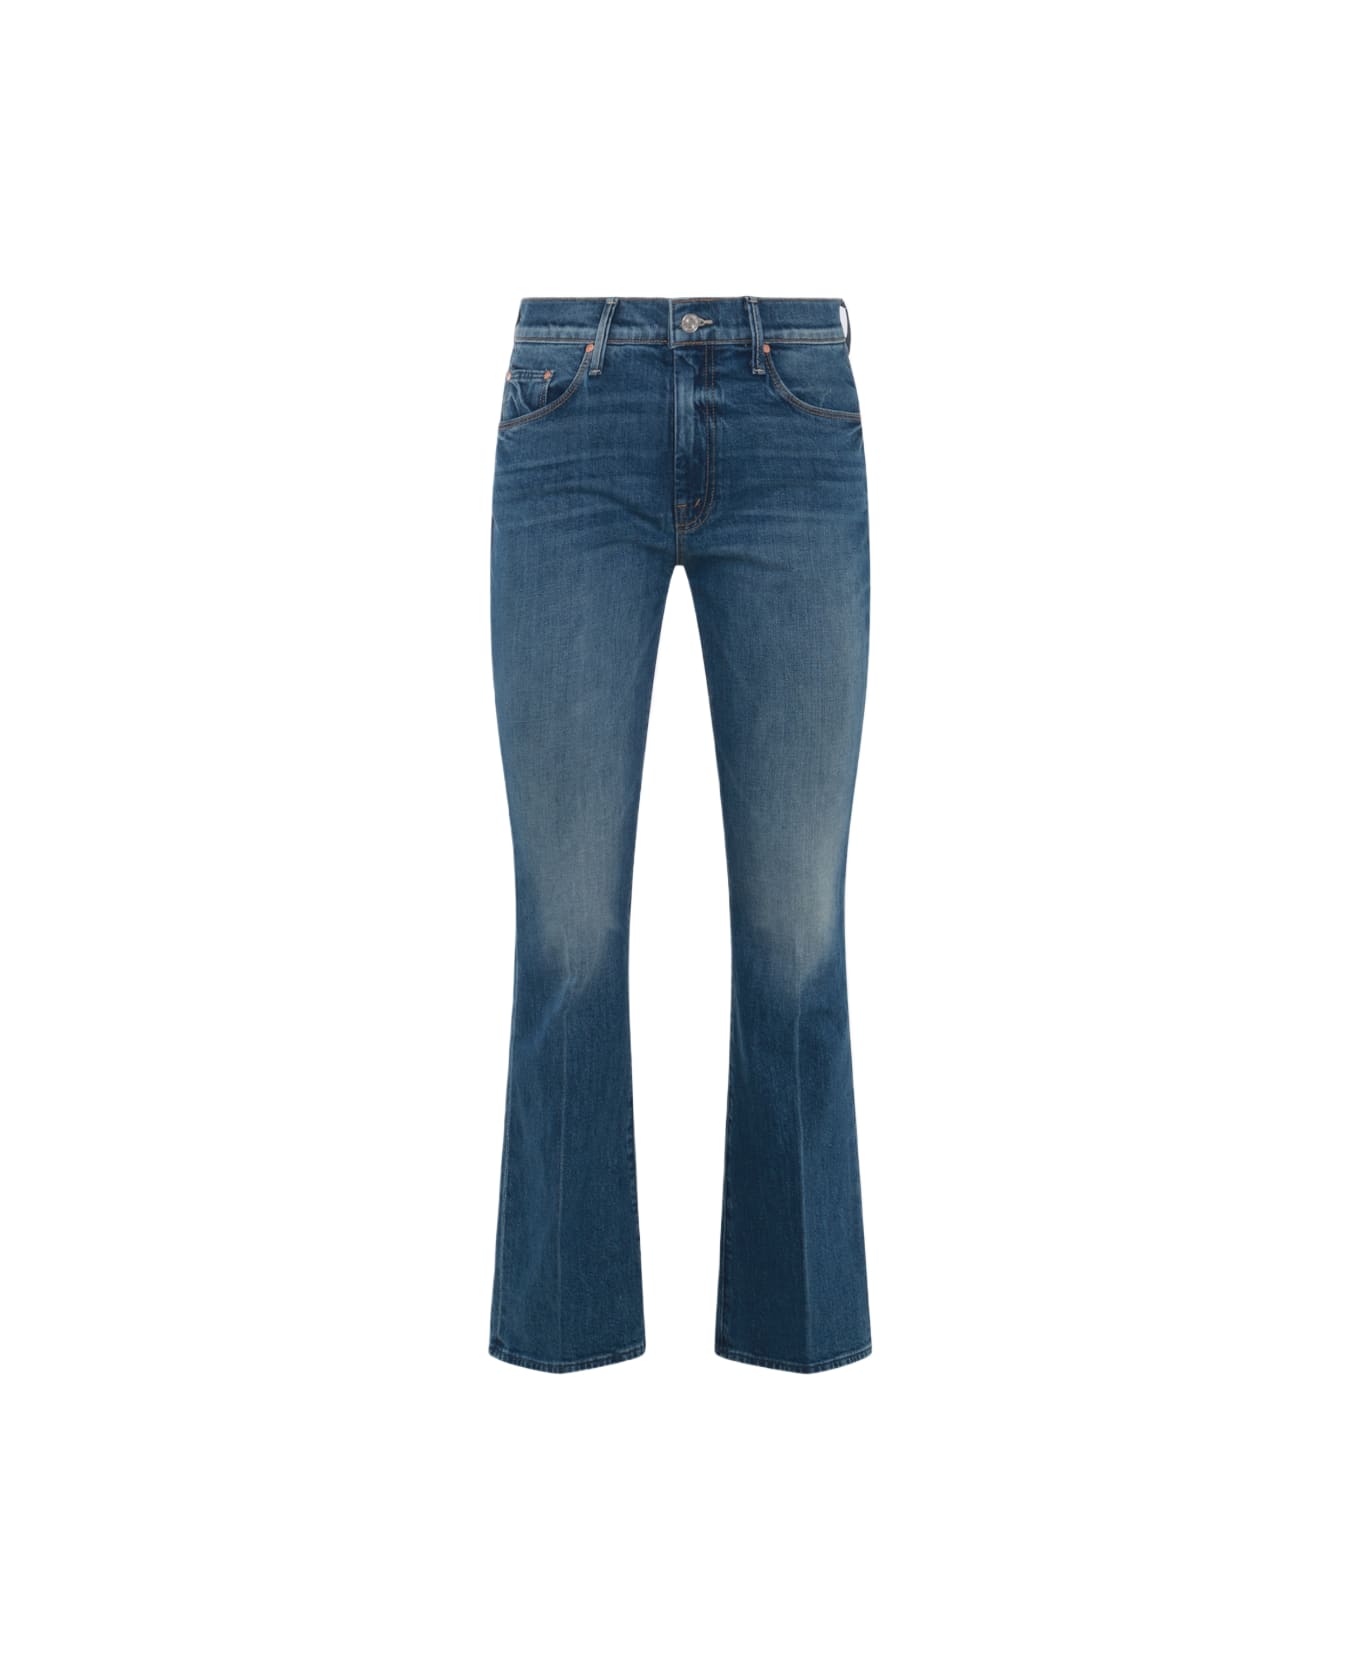 Mother Navy Blue Cotton Blend Jeans - ITS A SMALL WORLD